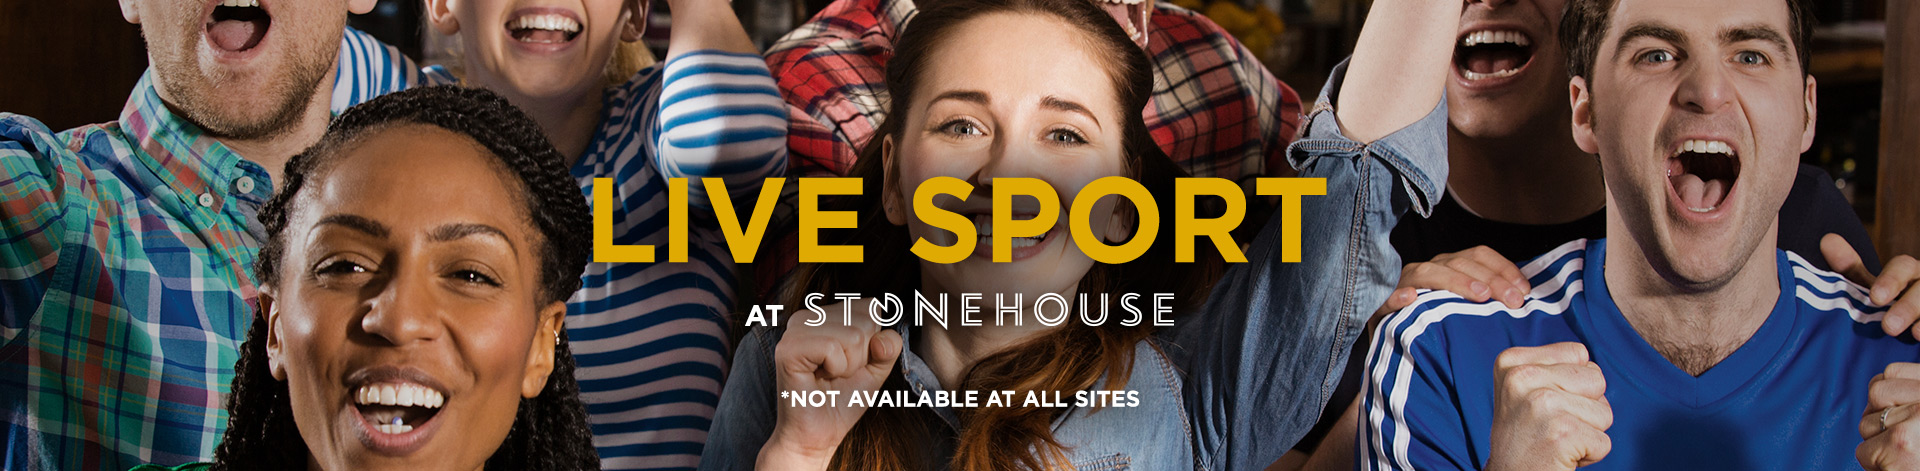  Live sport at Stonehouse.